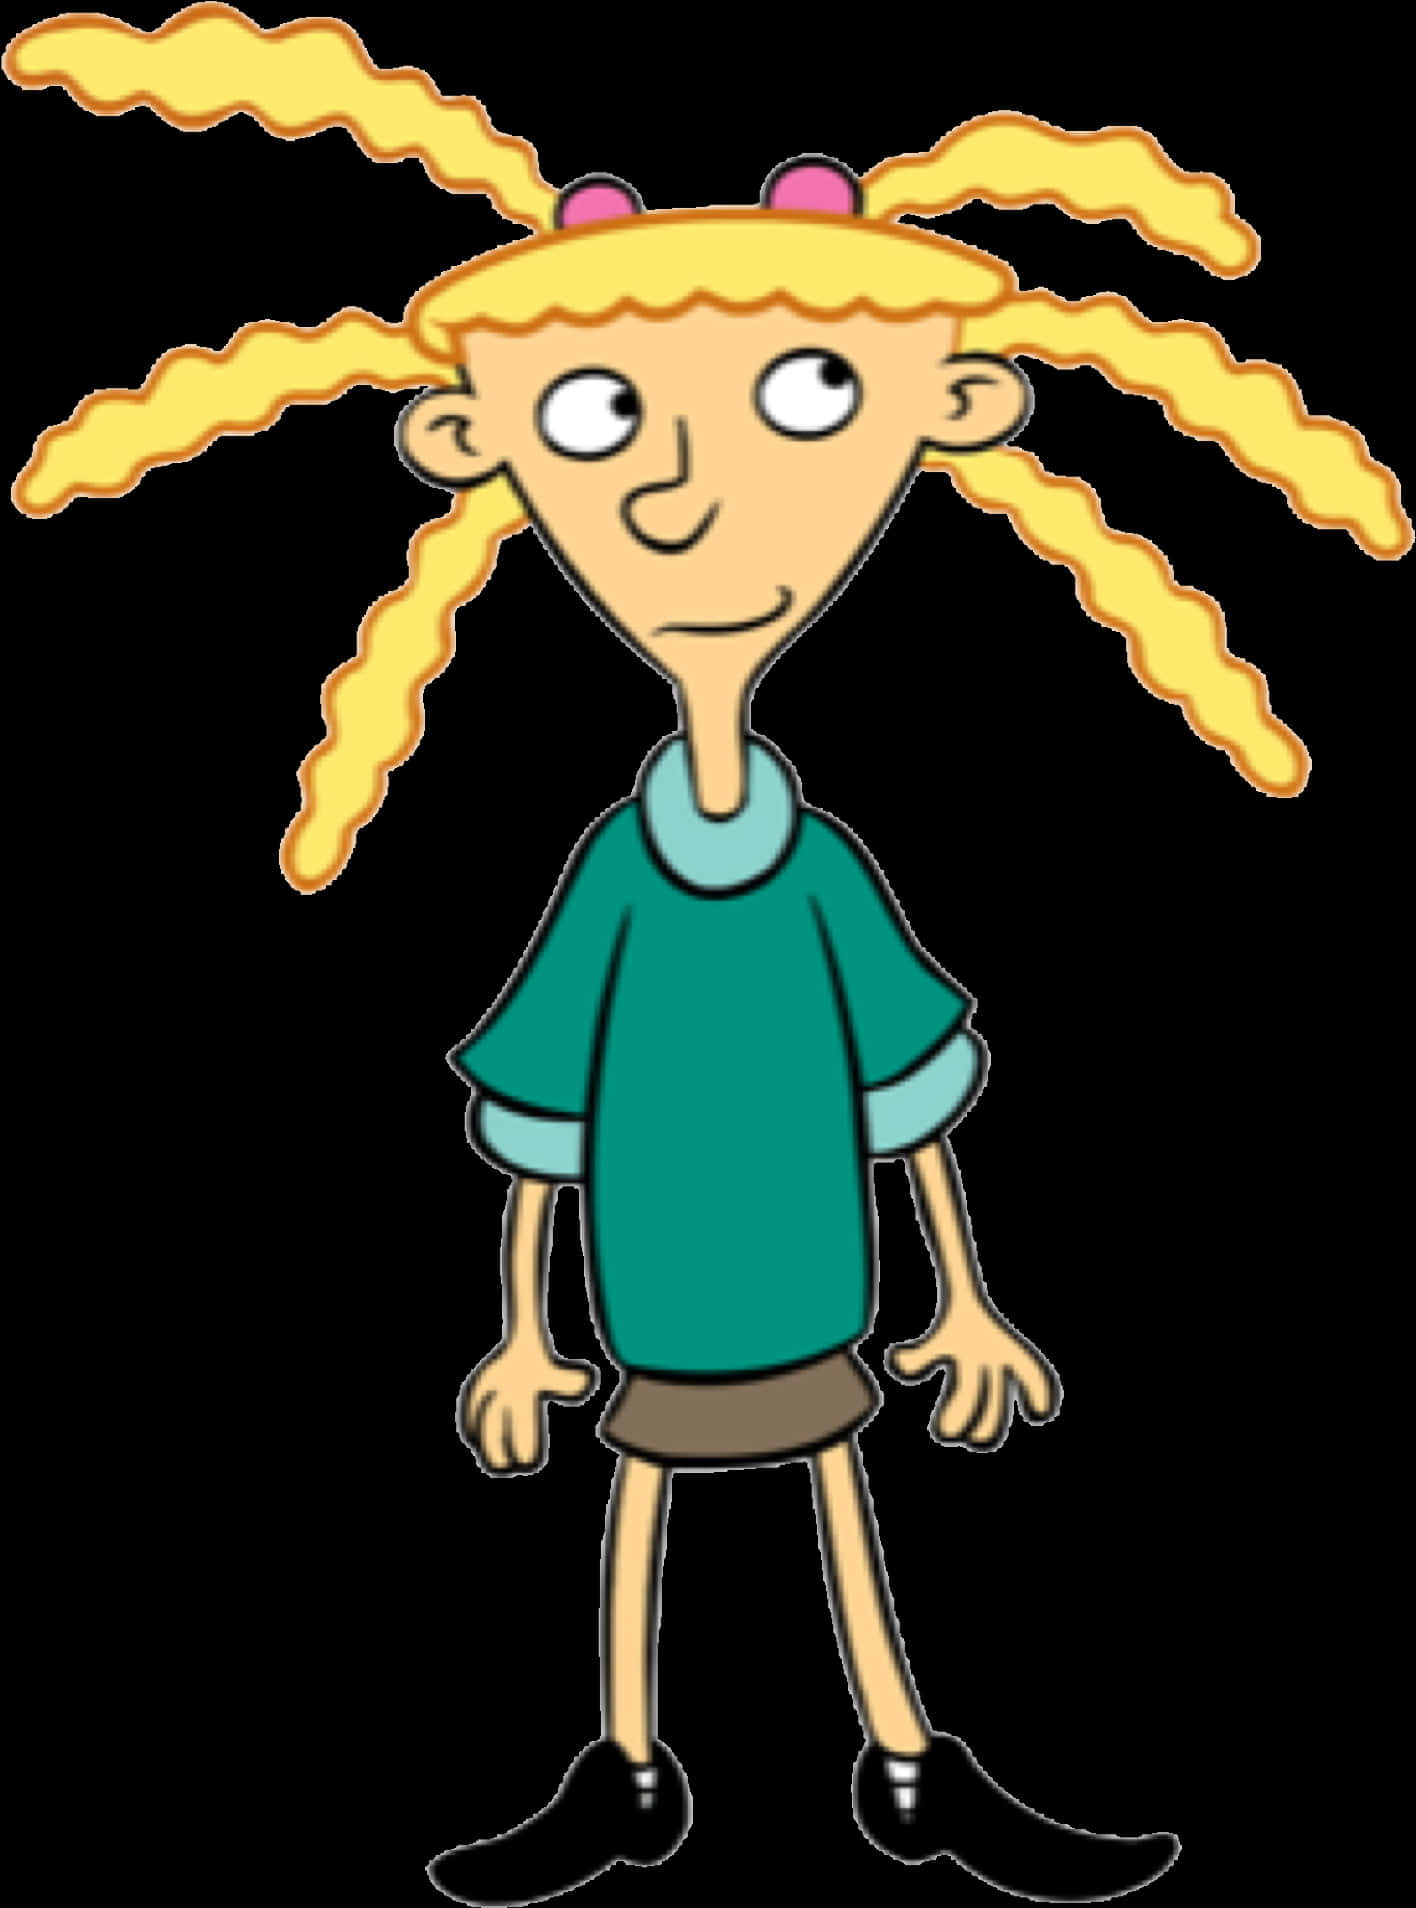 Cartoon Of A Girl With Long Blonde Hair